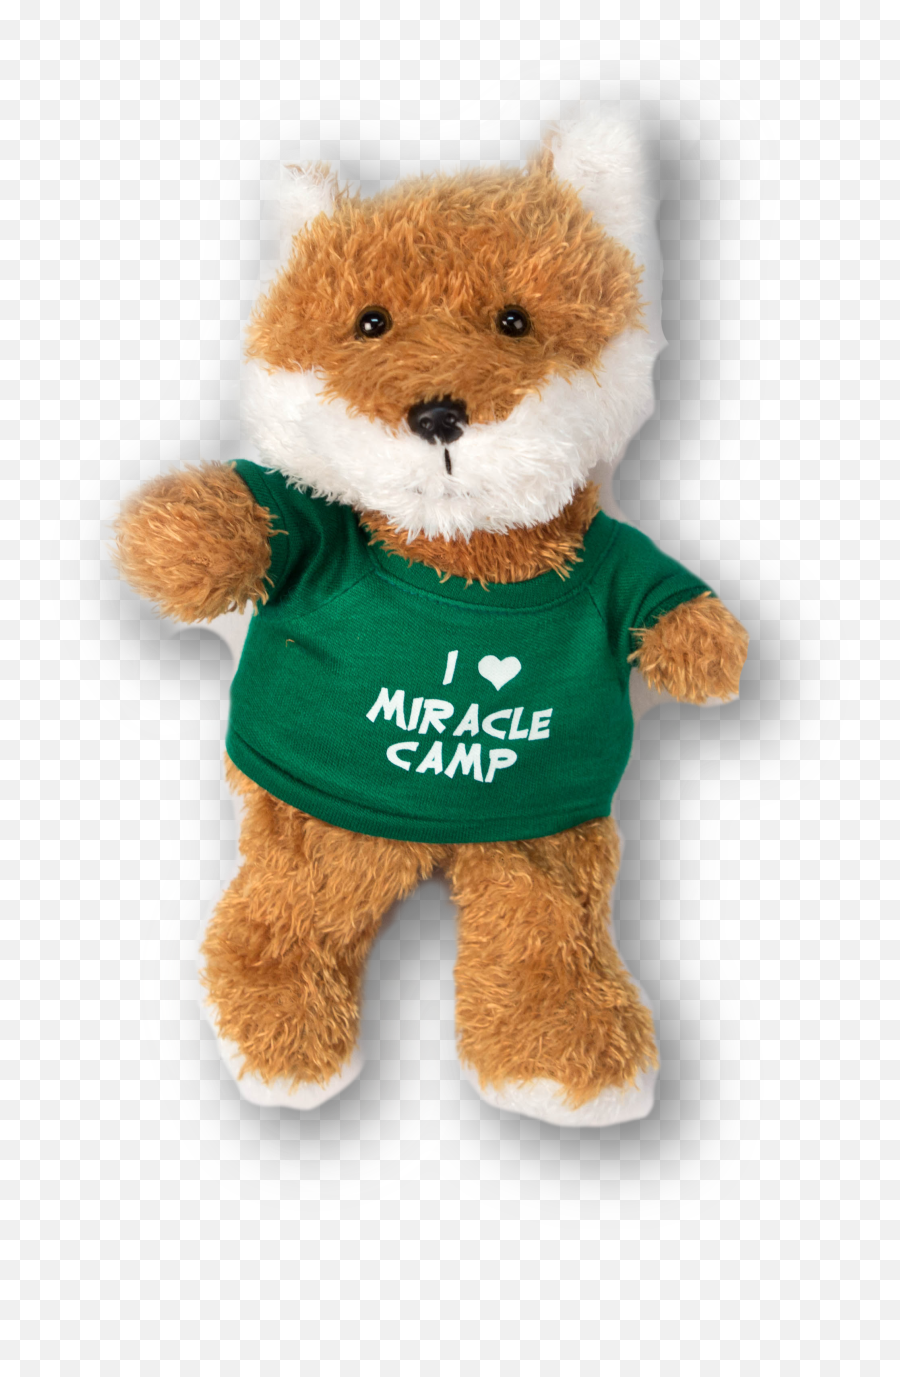 Download Teddy Bear - Full Size Png Image Pngkit Teddy Bear,Teddy Bears Png